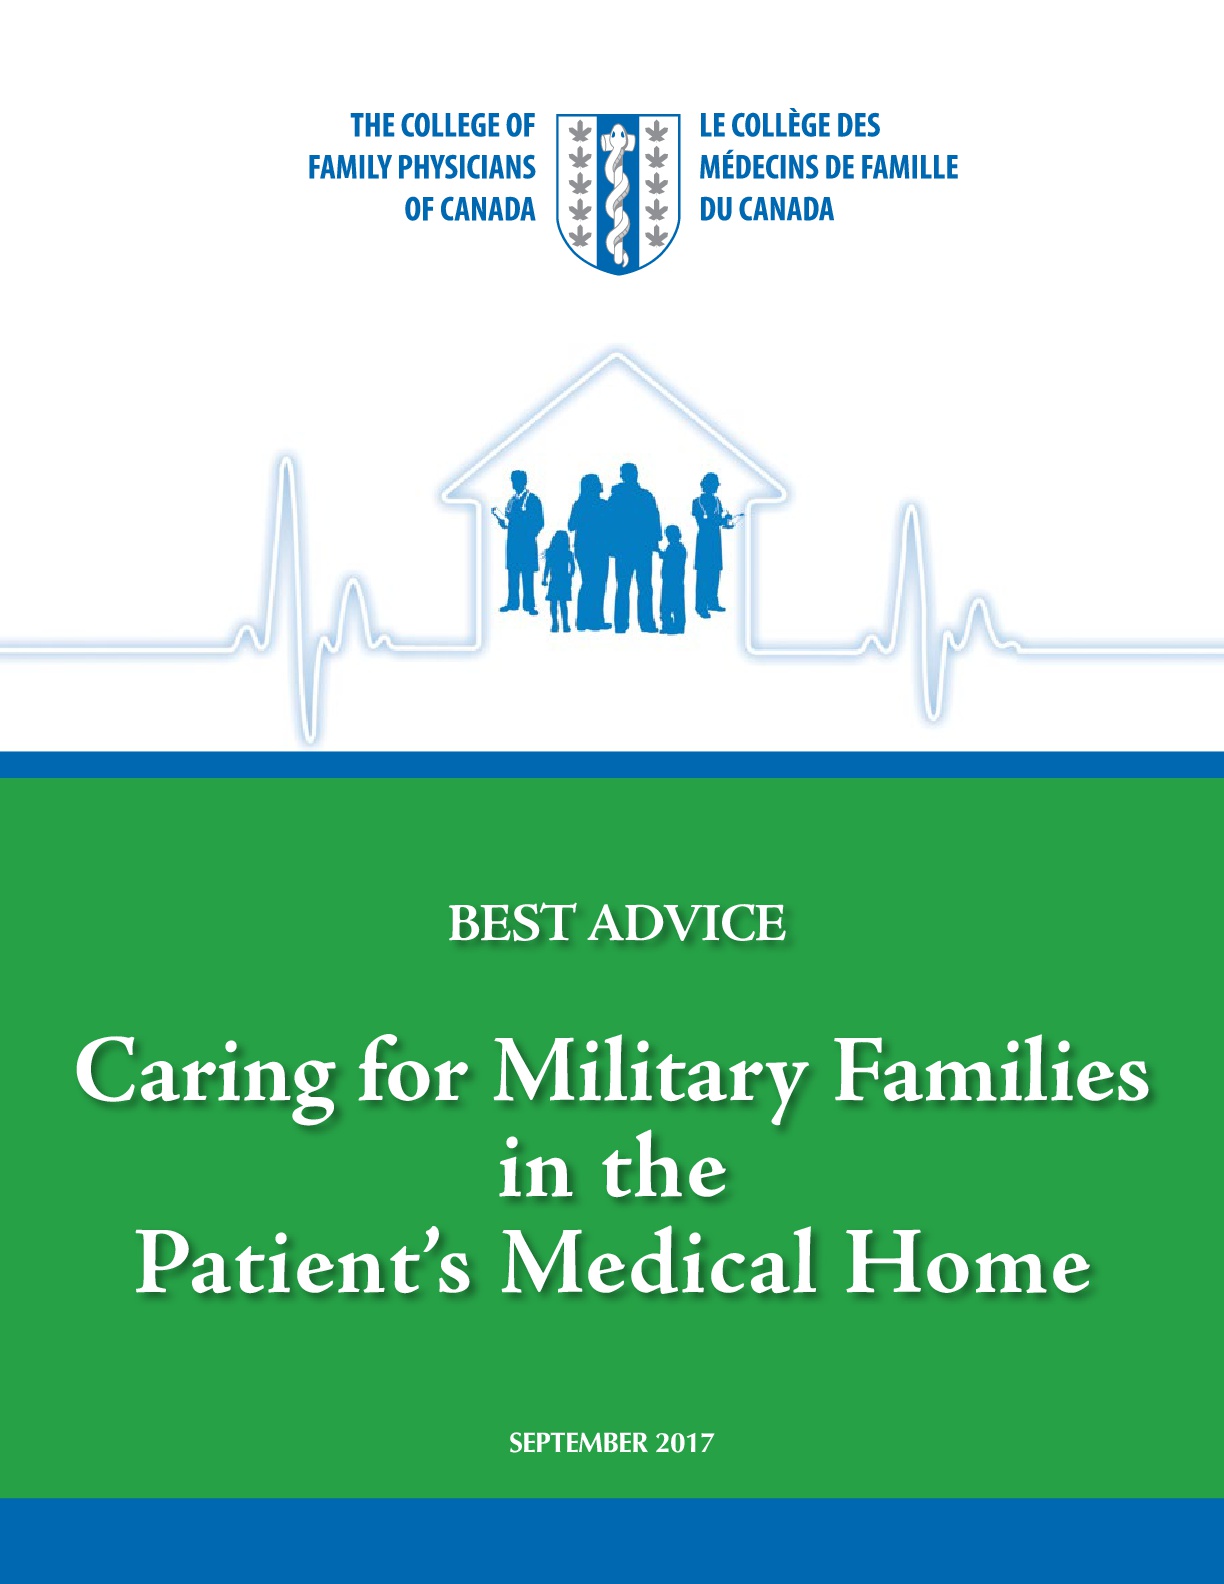 Thumbnail for Best Advice Guide: Caring for Military Families in the Patient’s Medical Home